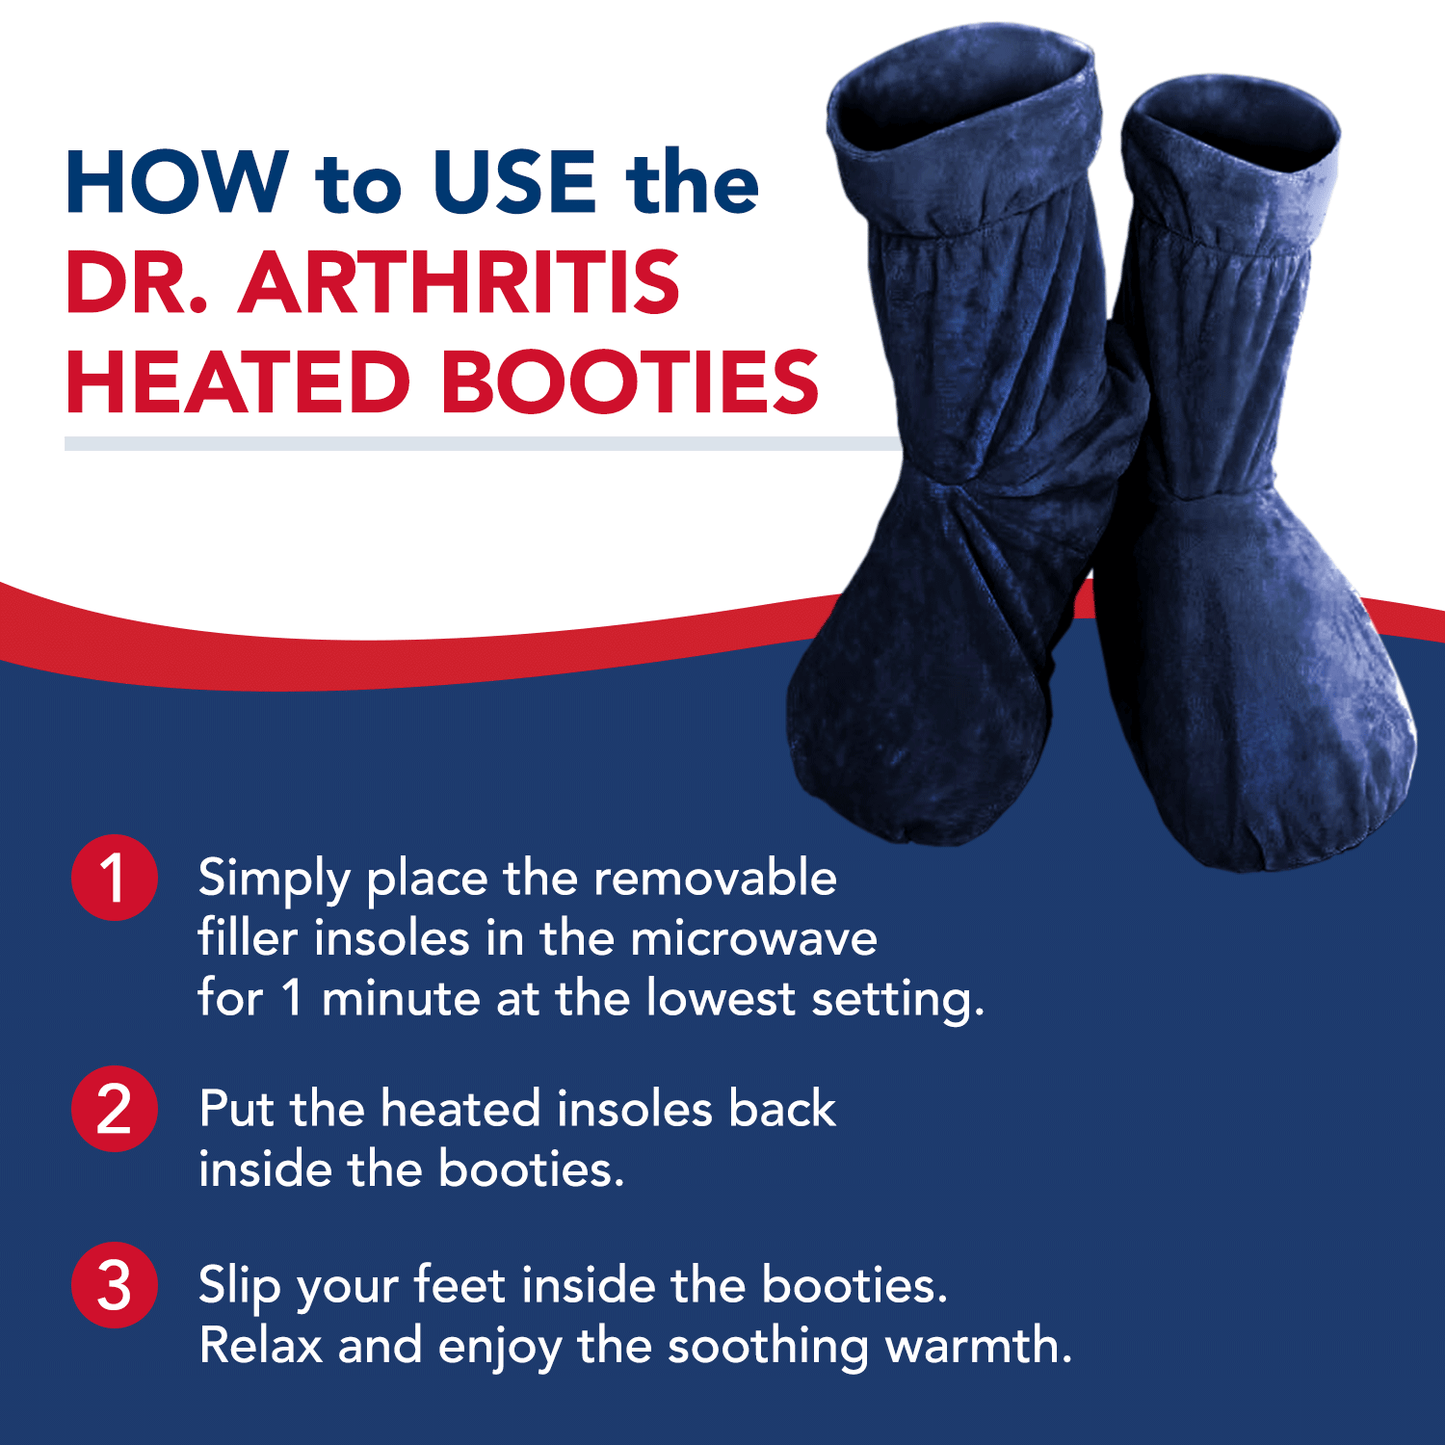 Heated Booties (Not for Walking in) - Foot Warmers for Women & Men - Heat Therapy Socks w/Microwavable Heating Pad for Feet - Foot Warmer Booties & Doctor Written Handbook